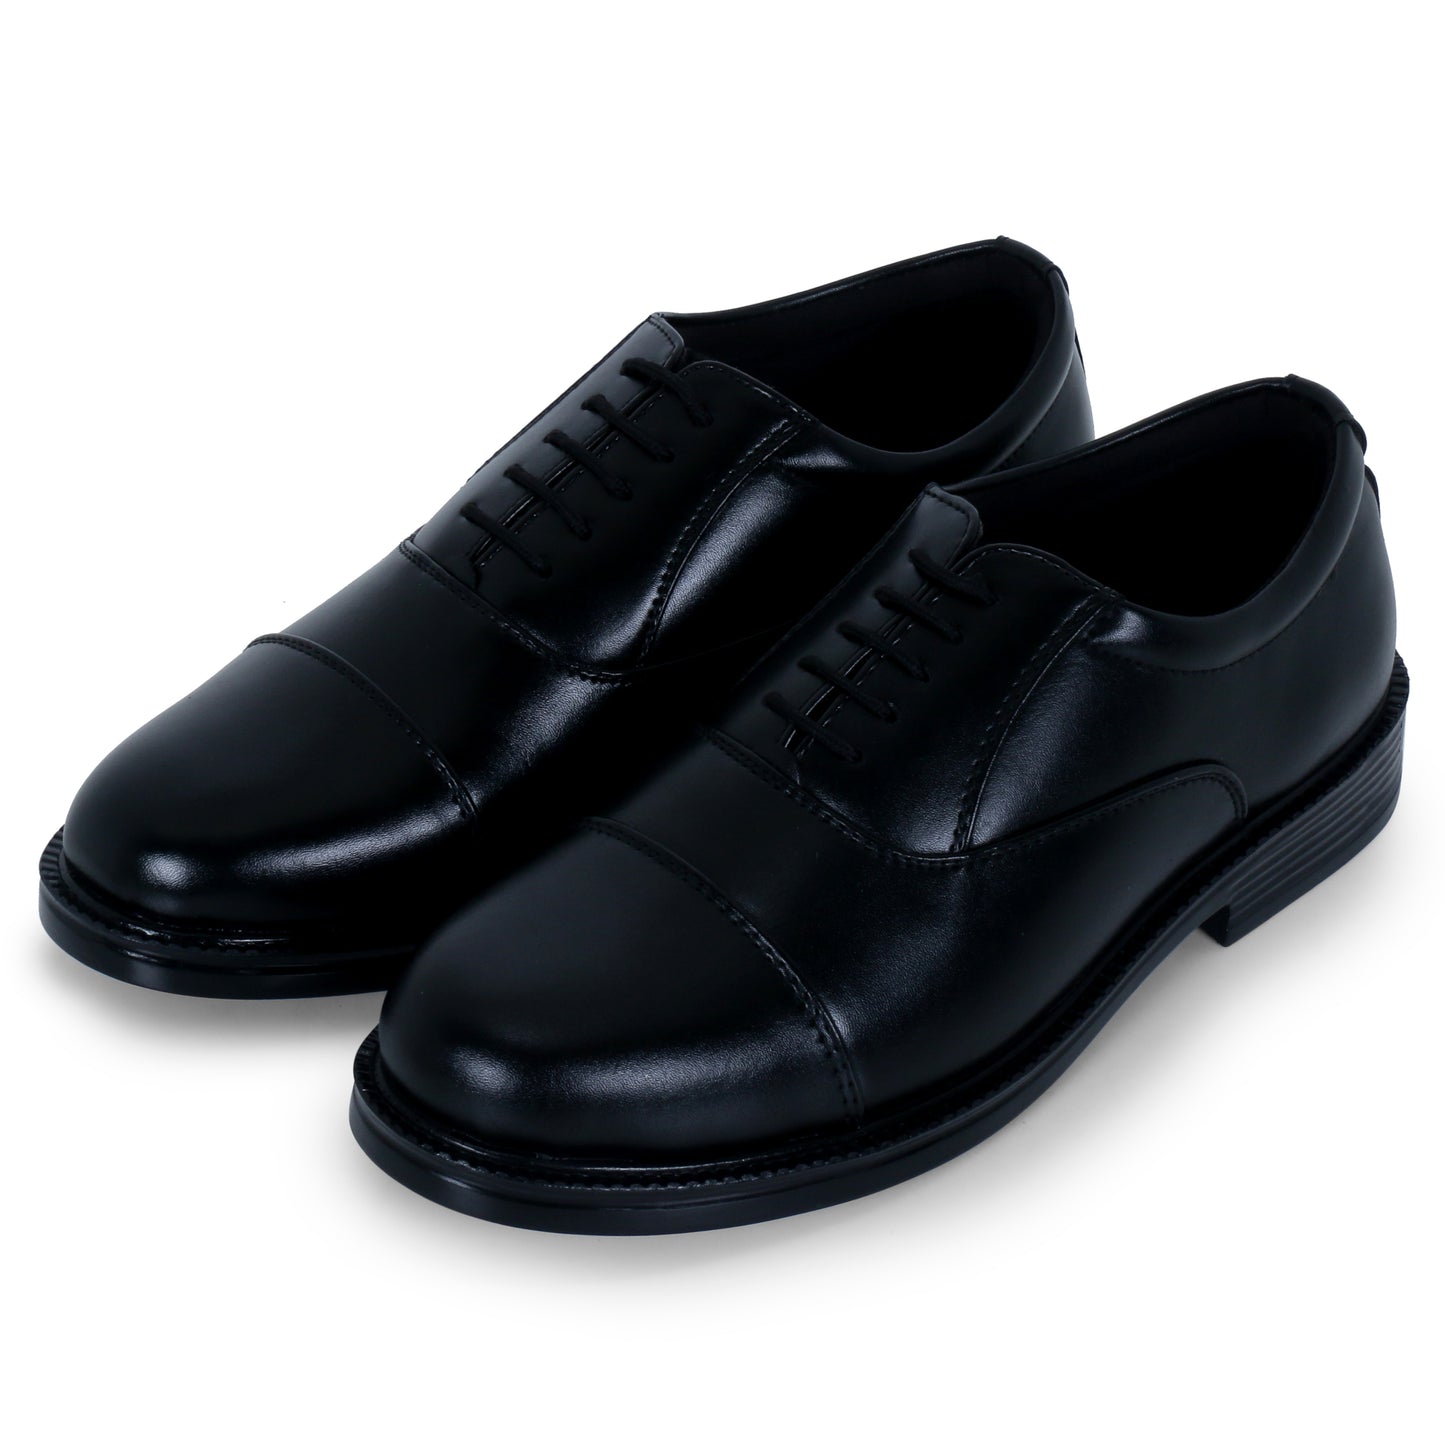 DOCTOR EXTRA SOFT D-801 Mens Classic Oxford Memory Foam Shoe for Uniform Dress, Black Formal, Office, Party,Wedding| Lightweight & Comfortable| Premium PU Grip Sole Derby Slip on Lace Up Gents & Boys